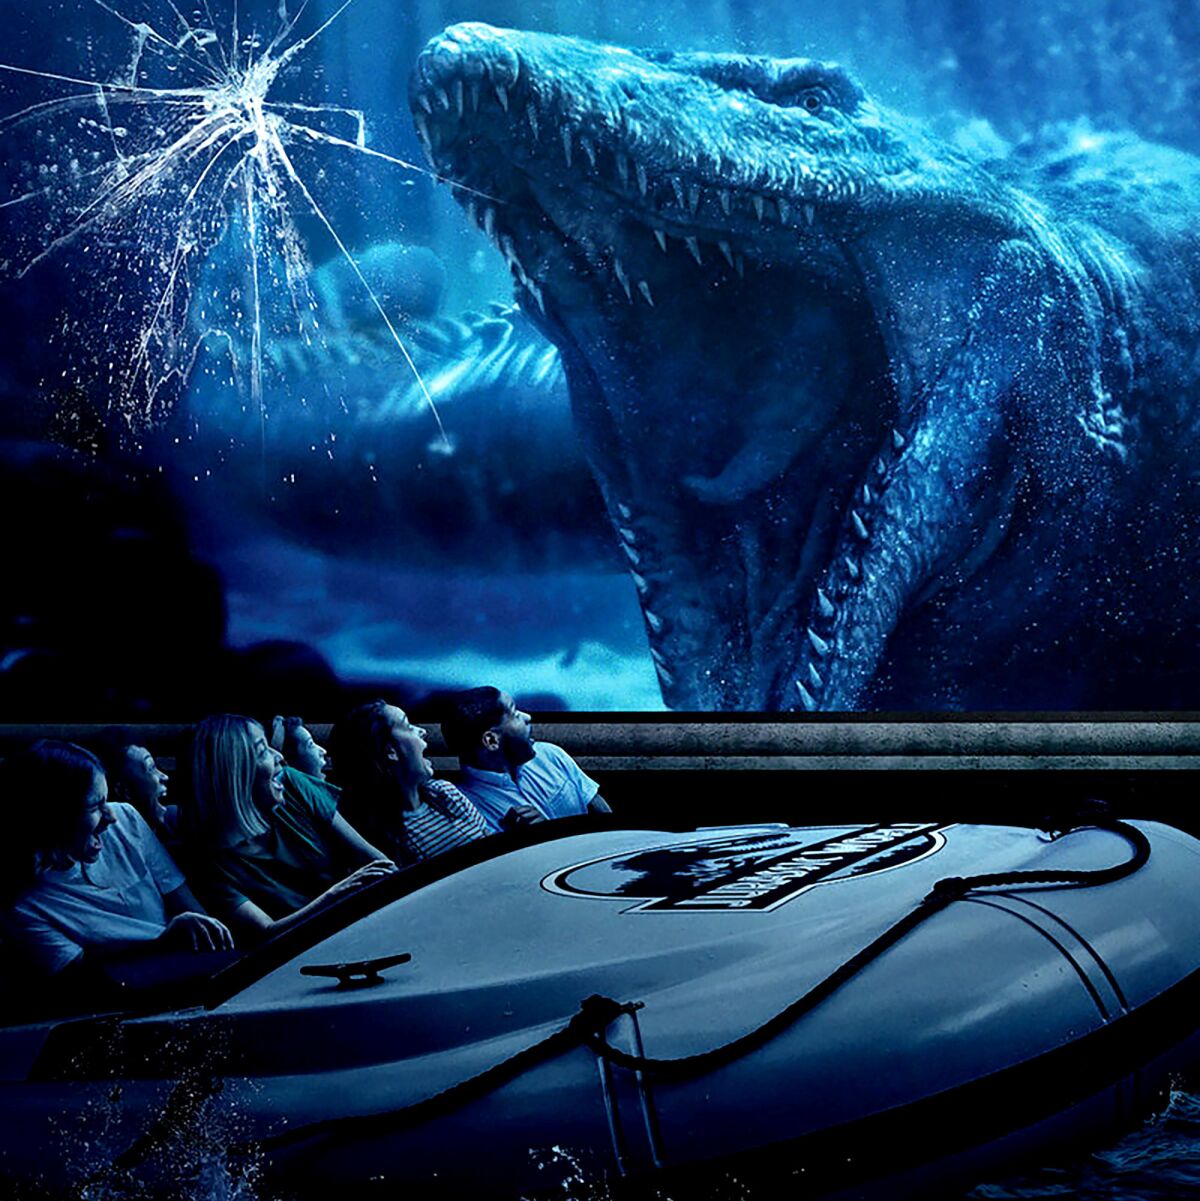 The newly opened "Jurassic World: The Ride" at Universal Studios Hollywood replaces the 23-year-old Jurassic Park ride, which closed in September. Featured dino: mosasaurus.